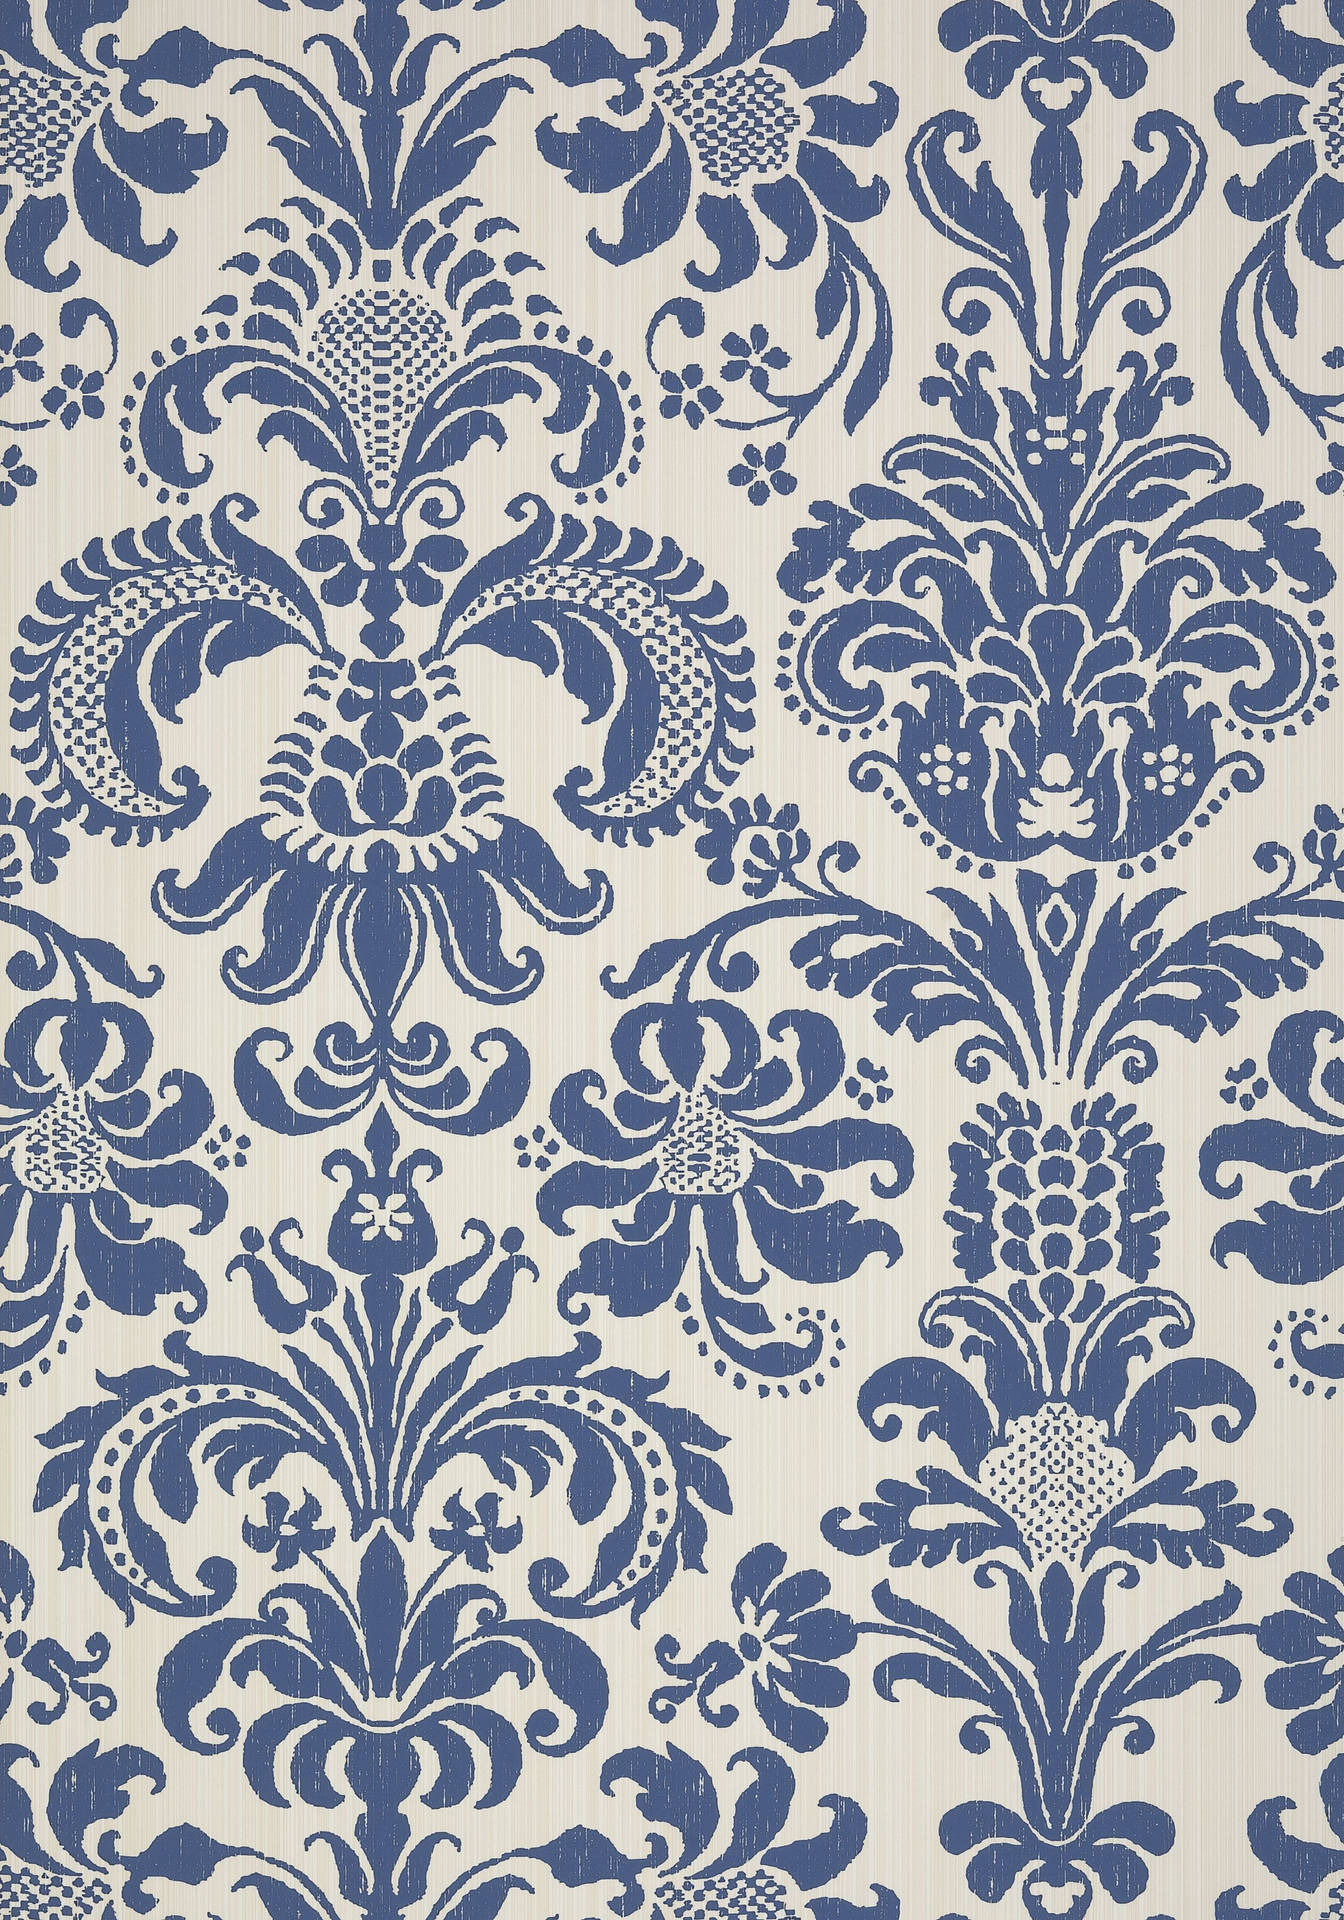 A Luxurious Combination Of Nautical Blue And Regal Gold In A Floral Print